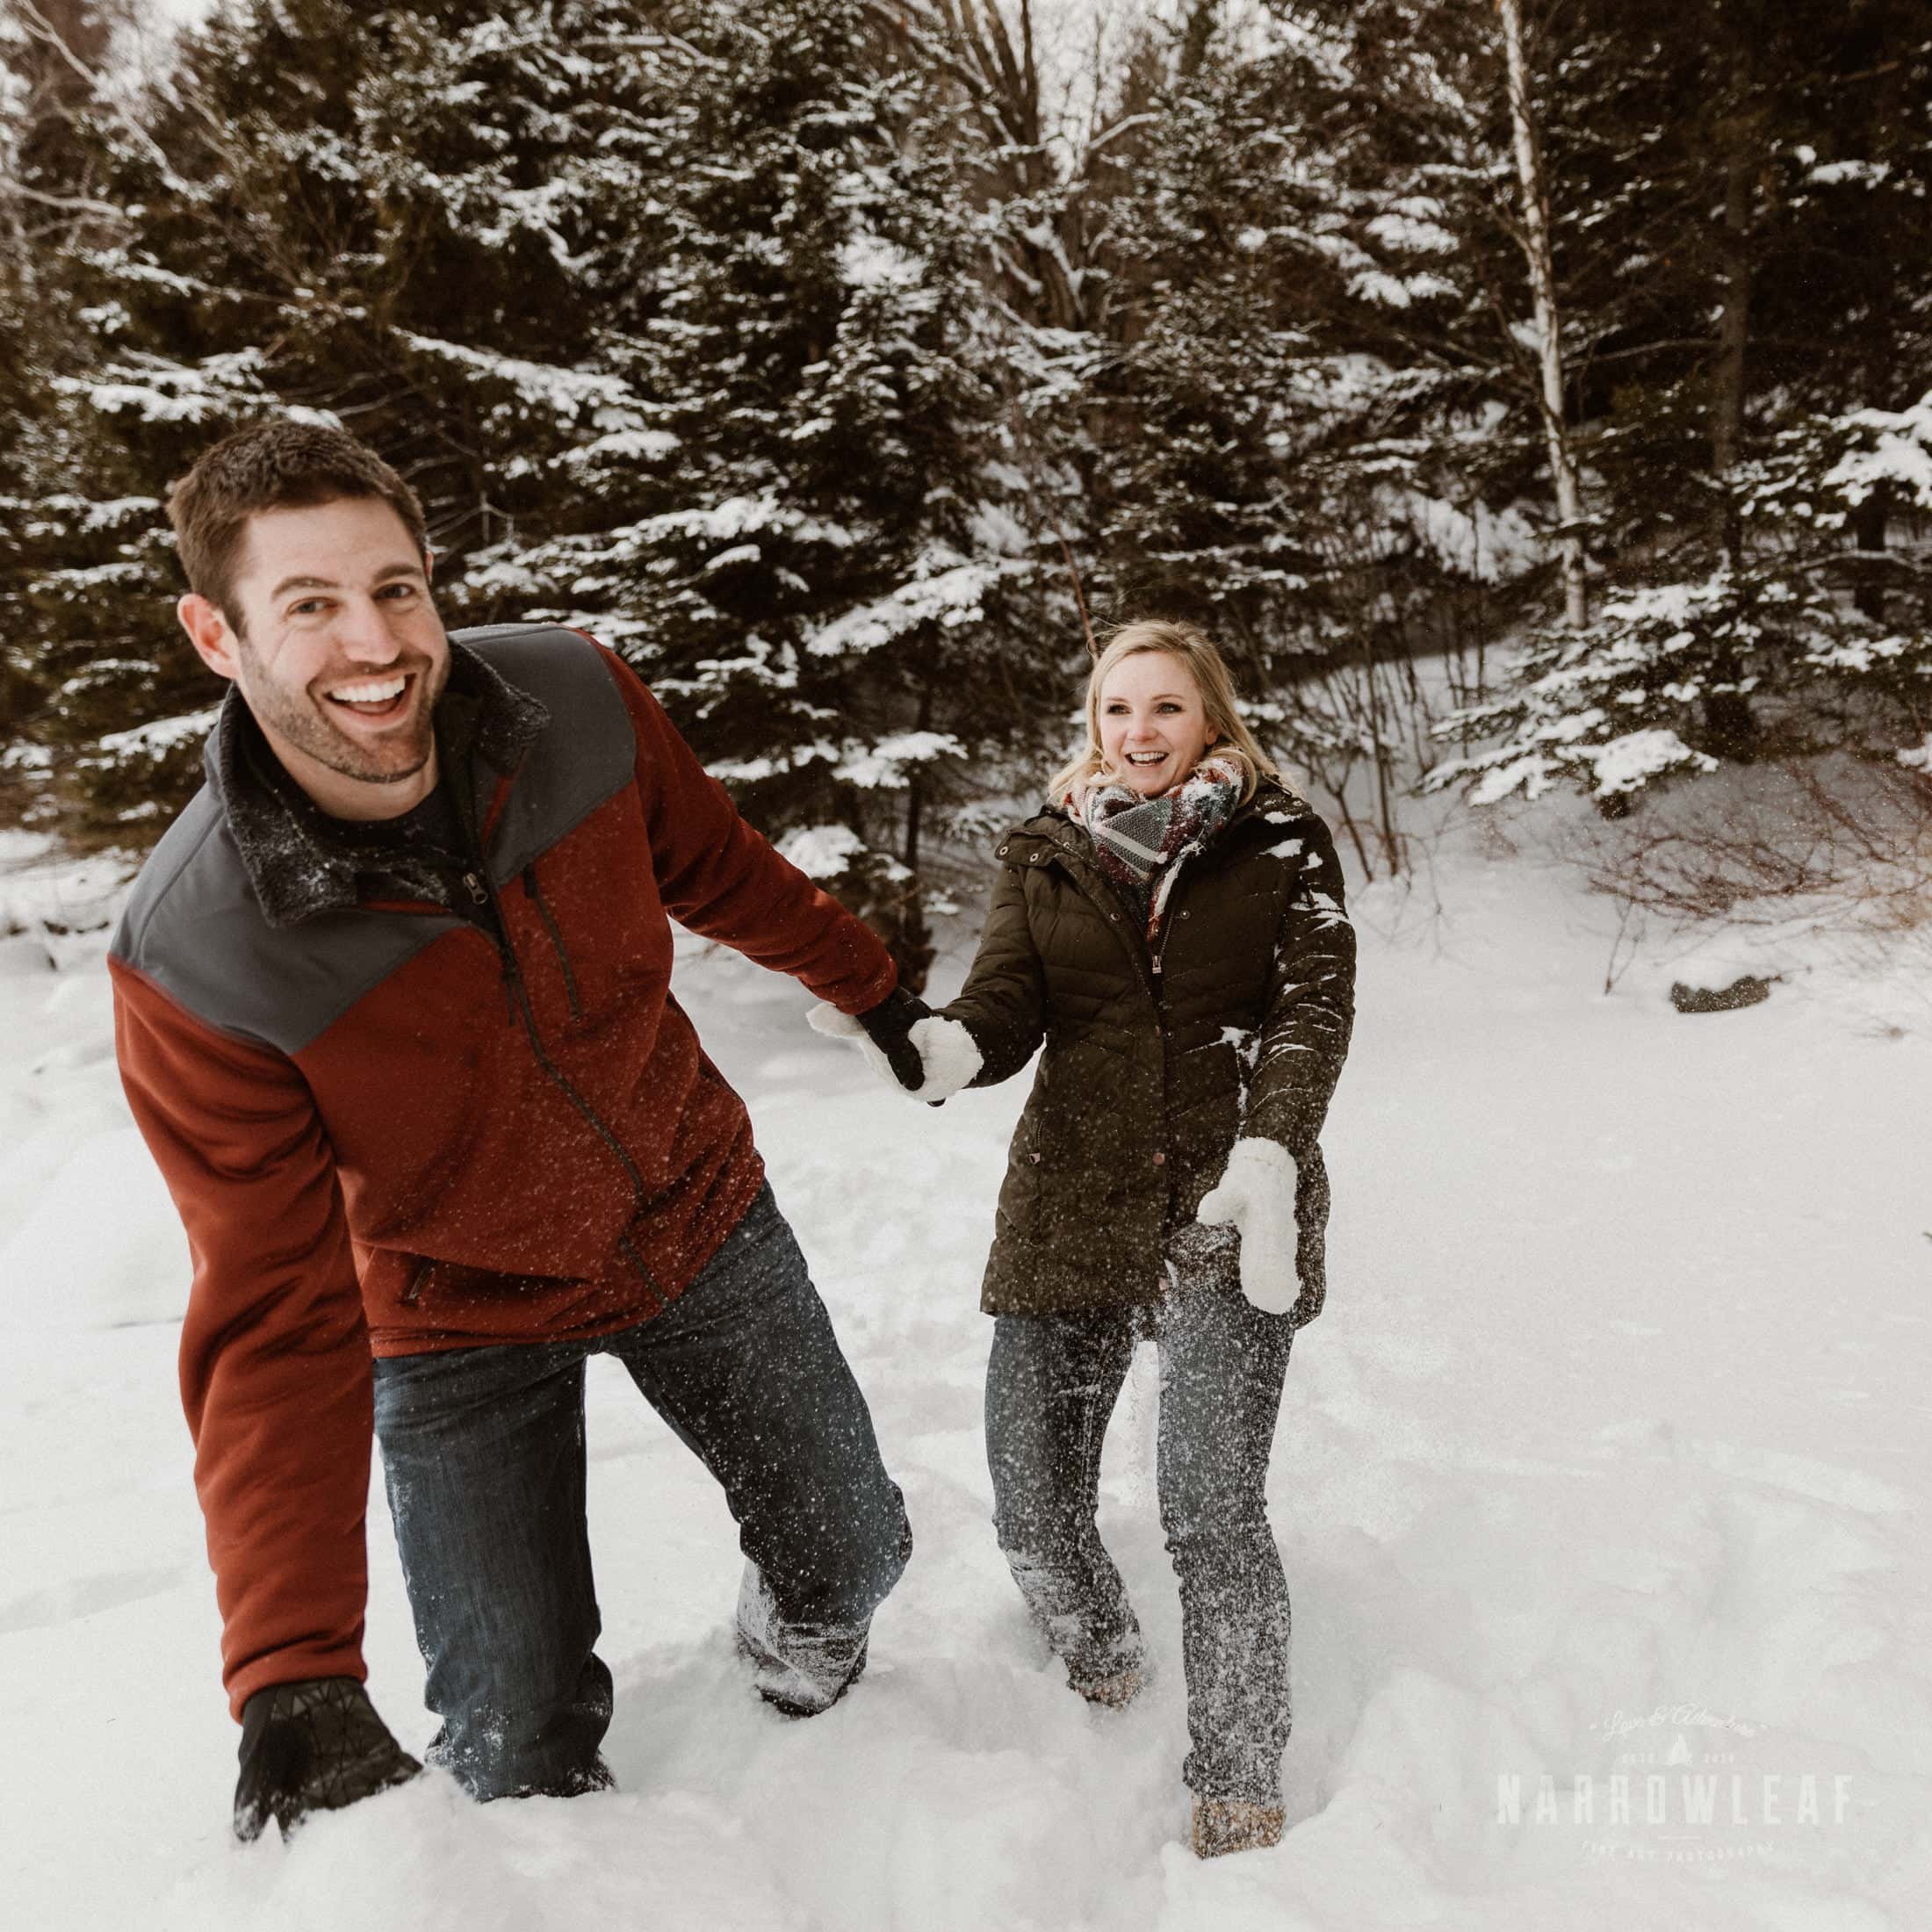 Two-Harbors-MN-winter-Engagement-photos-Narrowleaf_Love_and_Adventure_Photography-9228.jpg.jpg